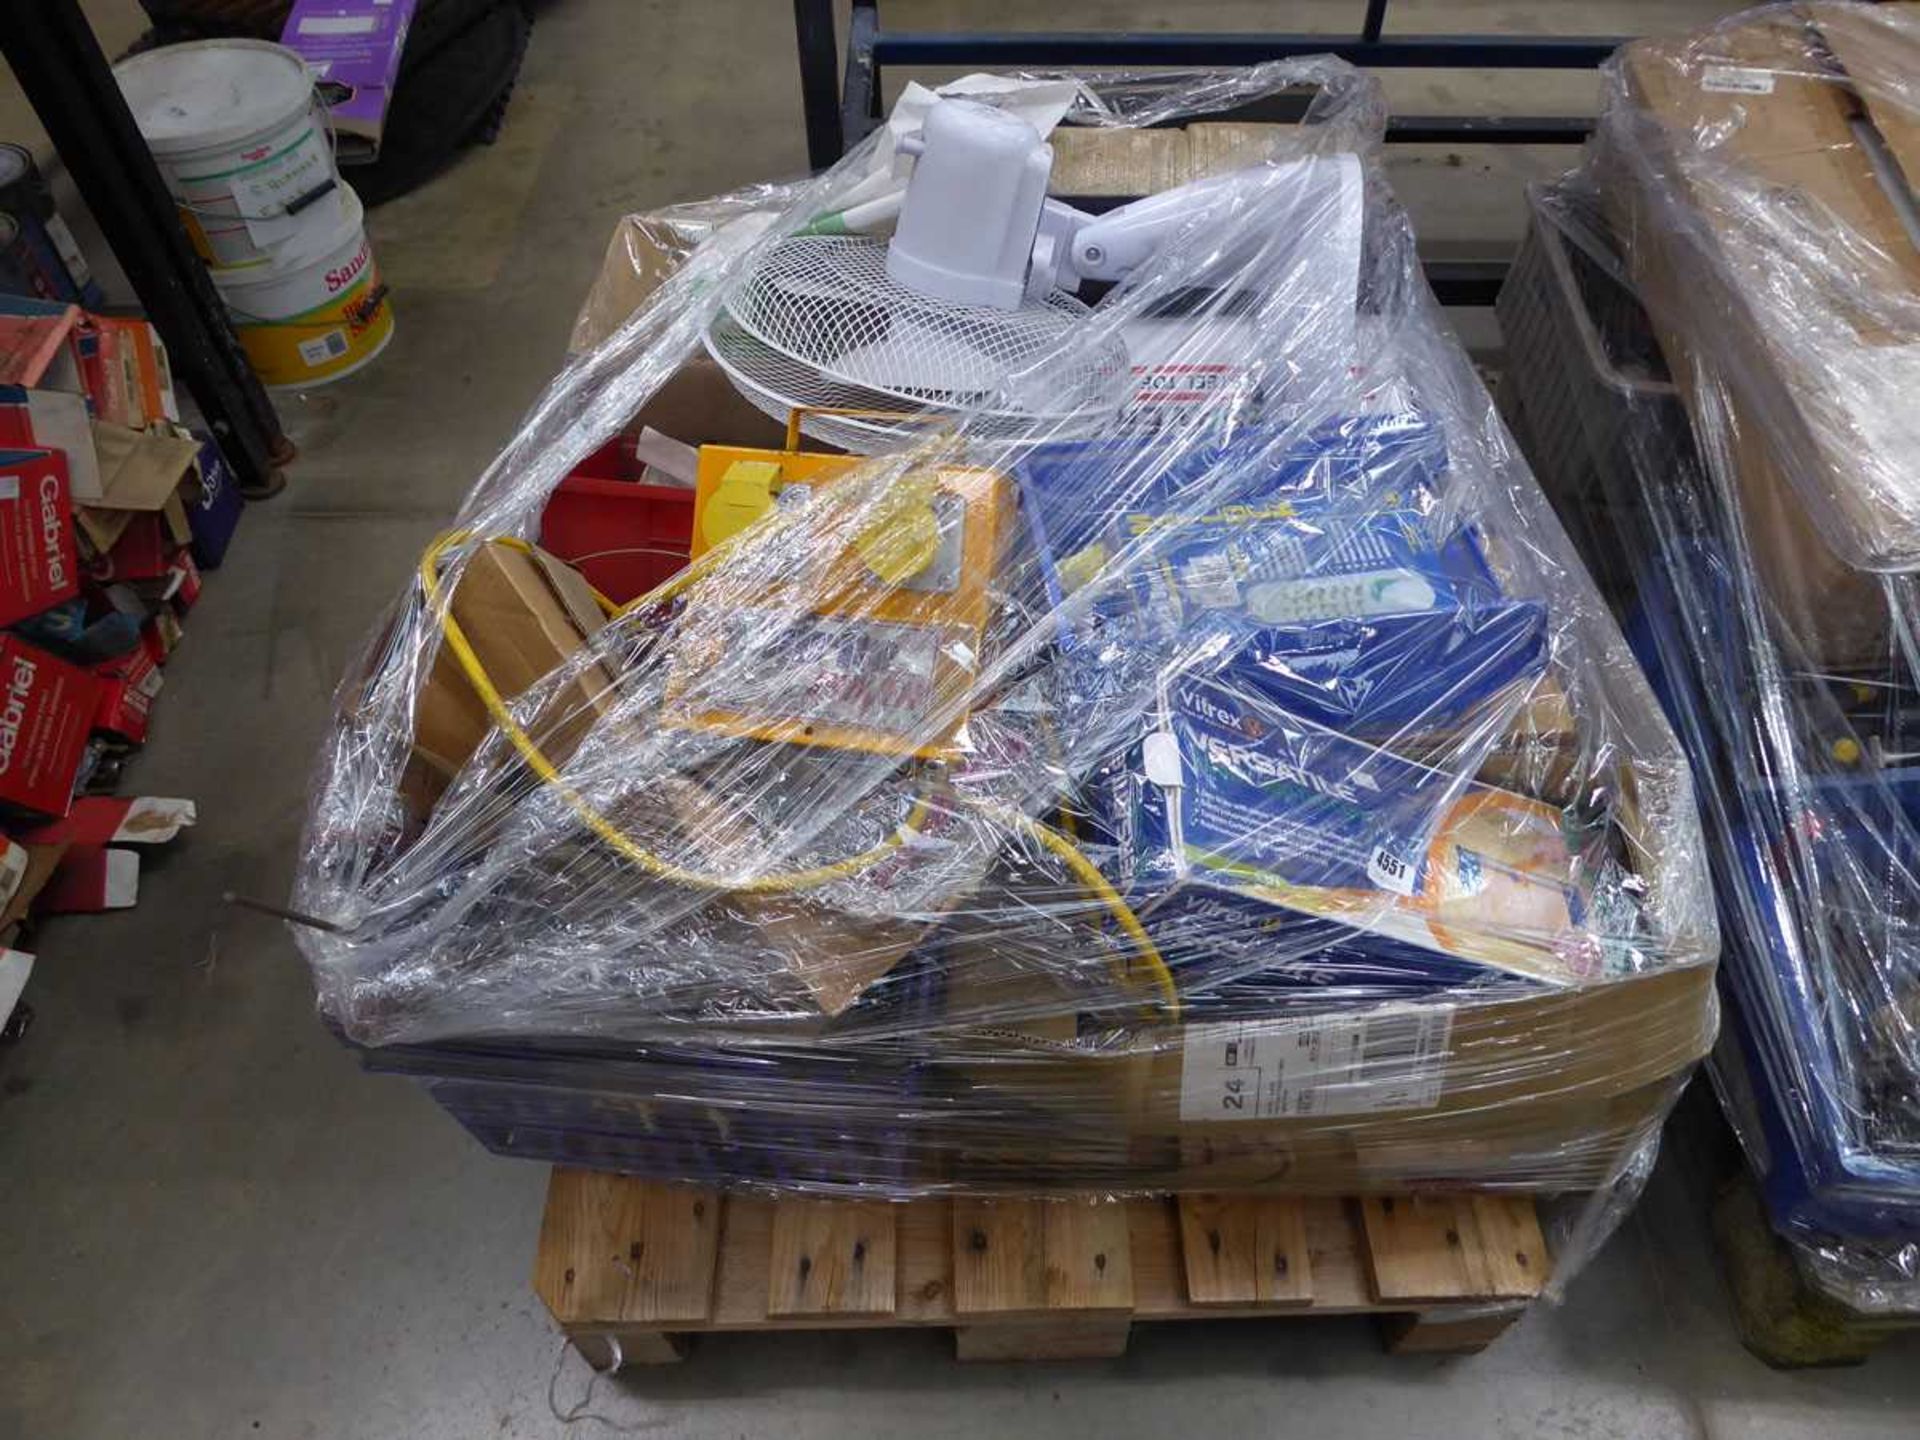 Pallet of assorted items including tile cutters, door locks, fans, transformer boxes, etc